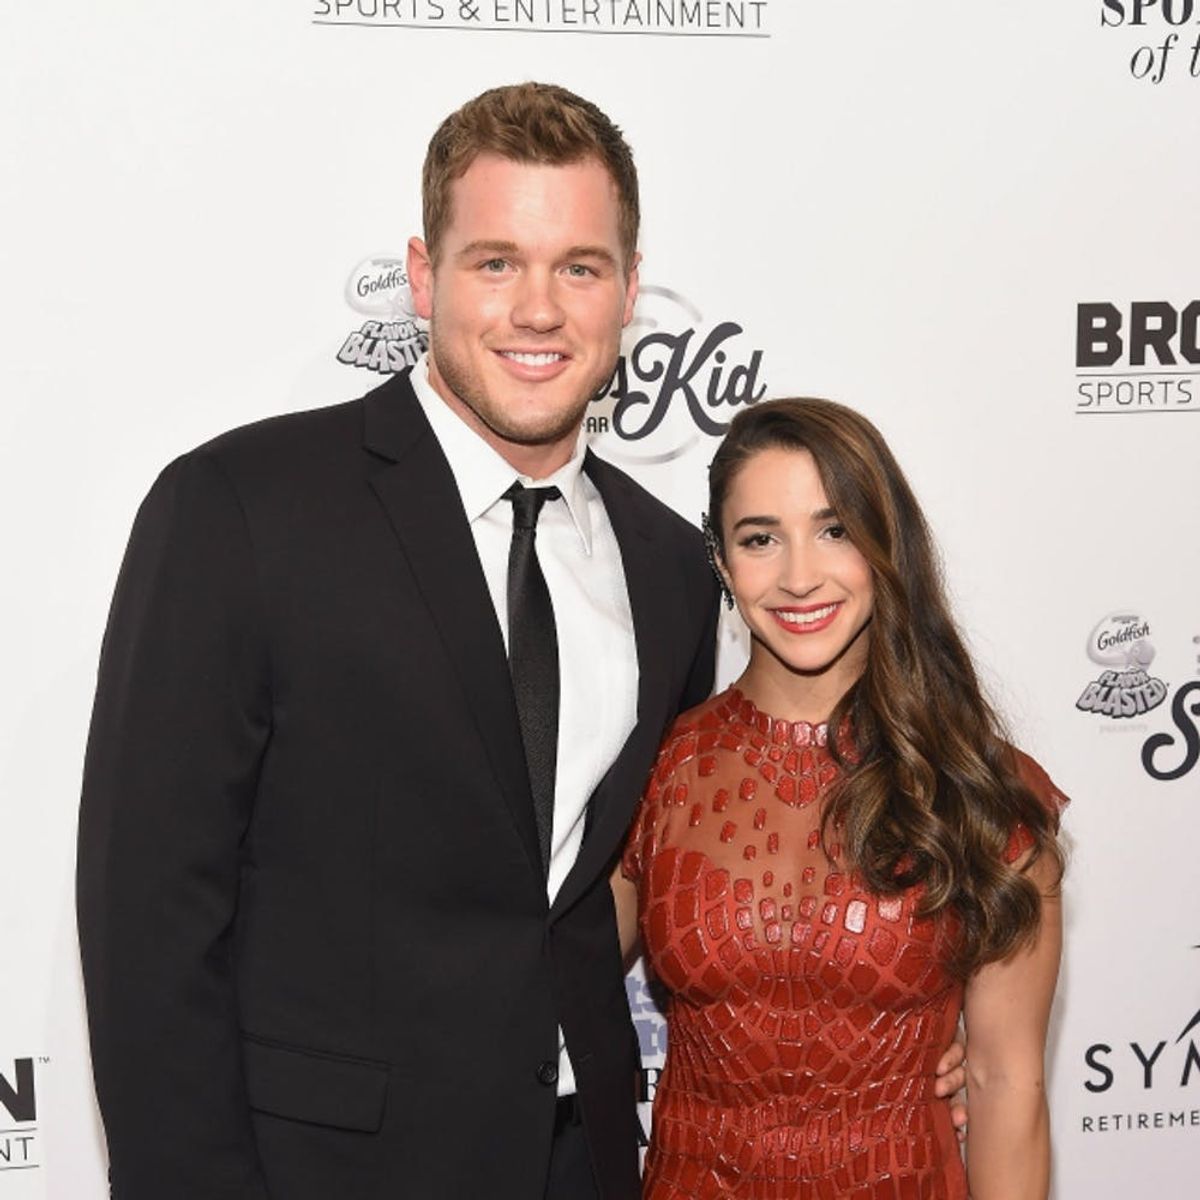 Aly Raisman and Colton Underwood Prove You Can Find Love Online